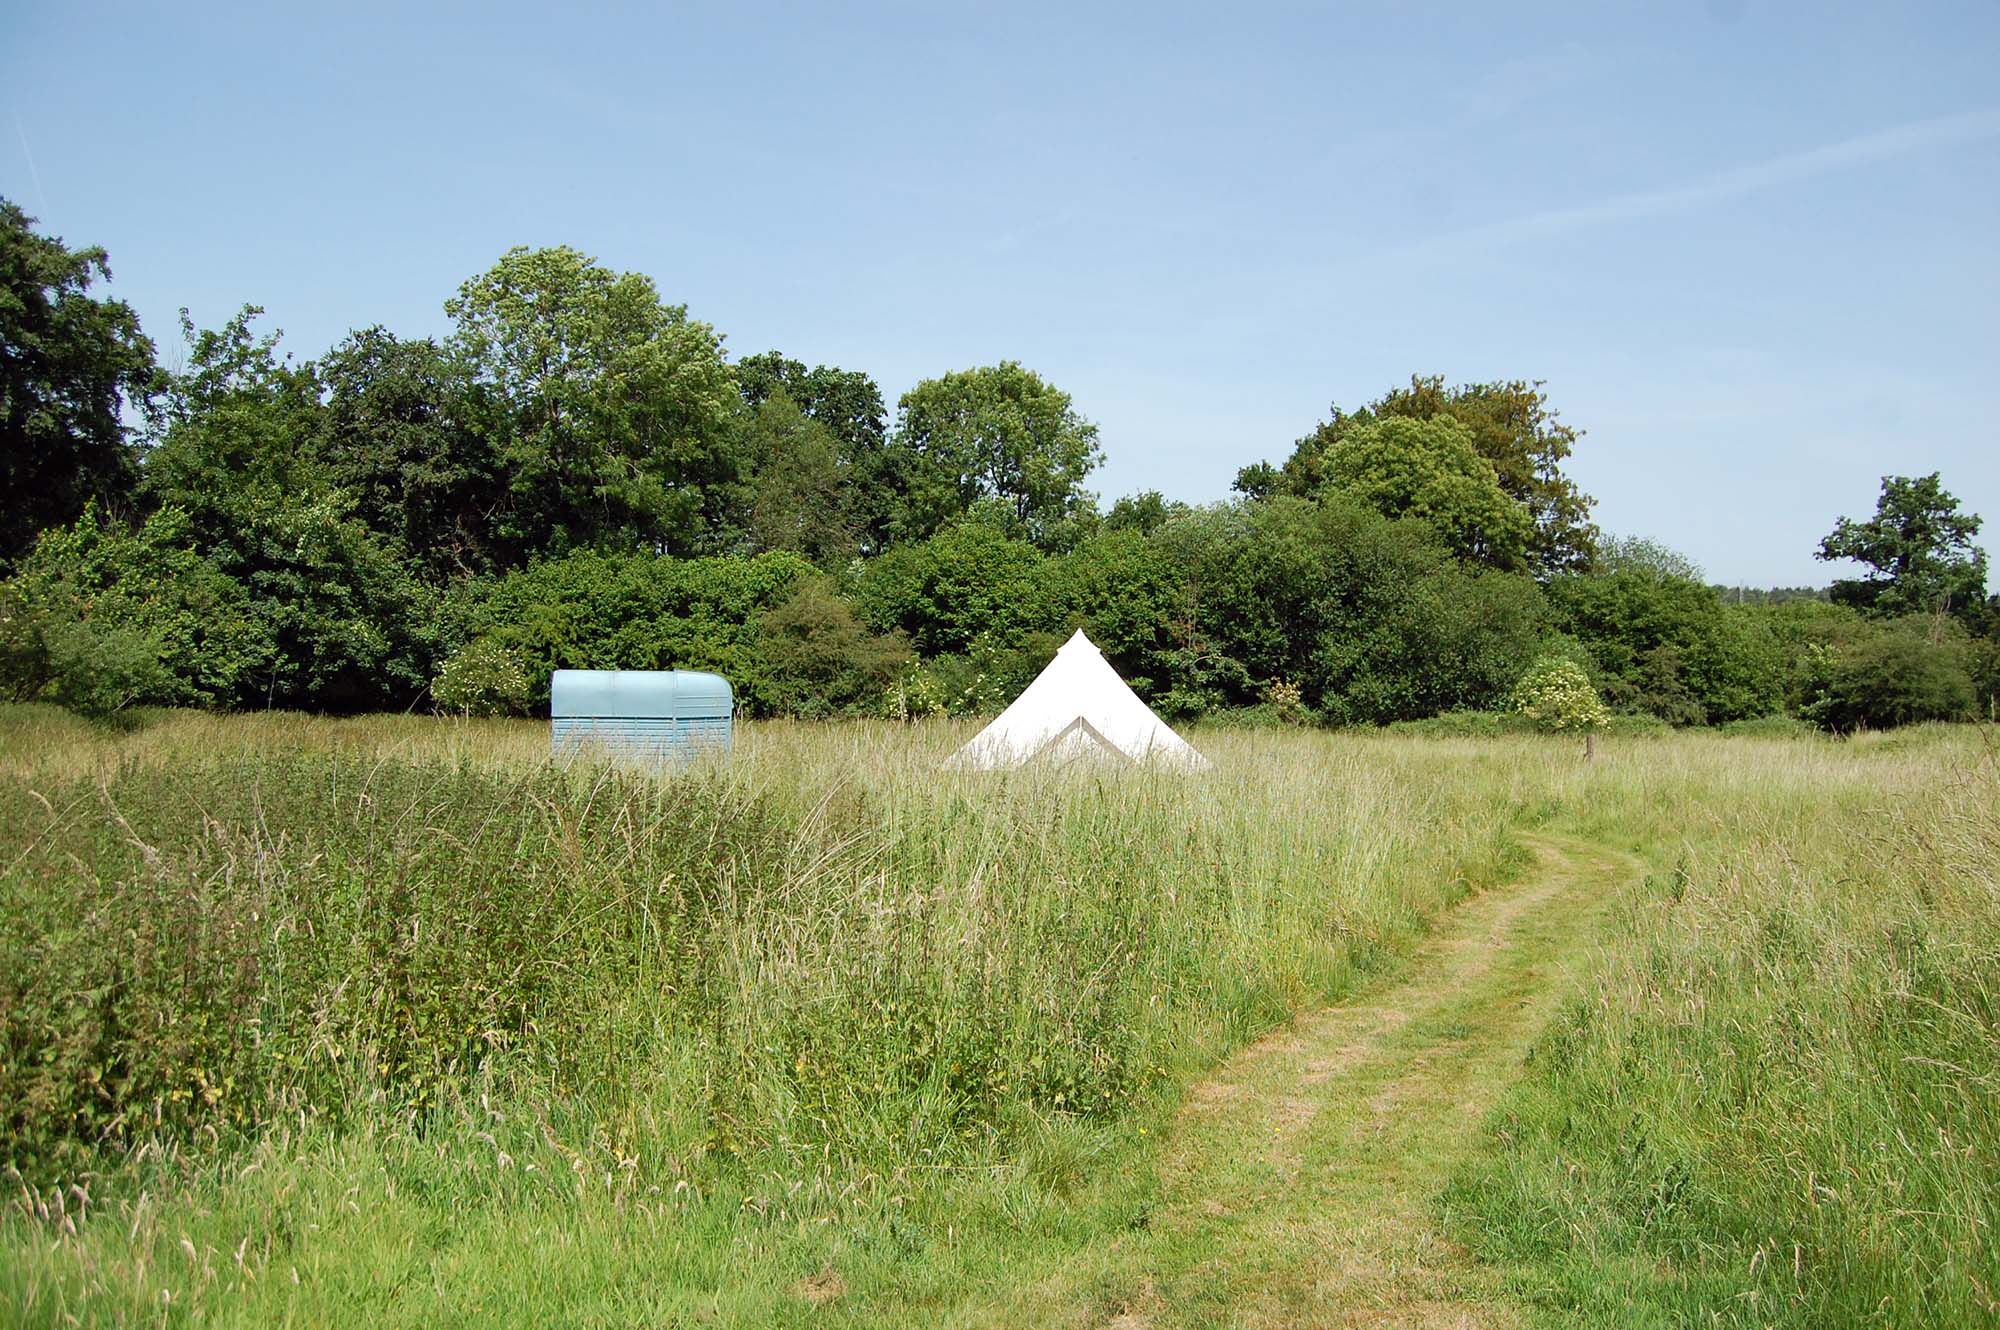 A bell tent in the middle of a dense grassy field, with trees in the background